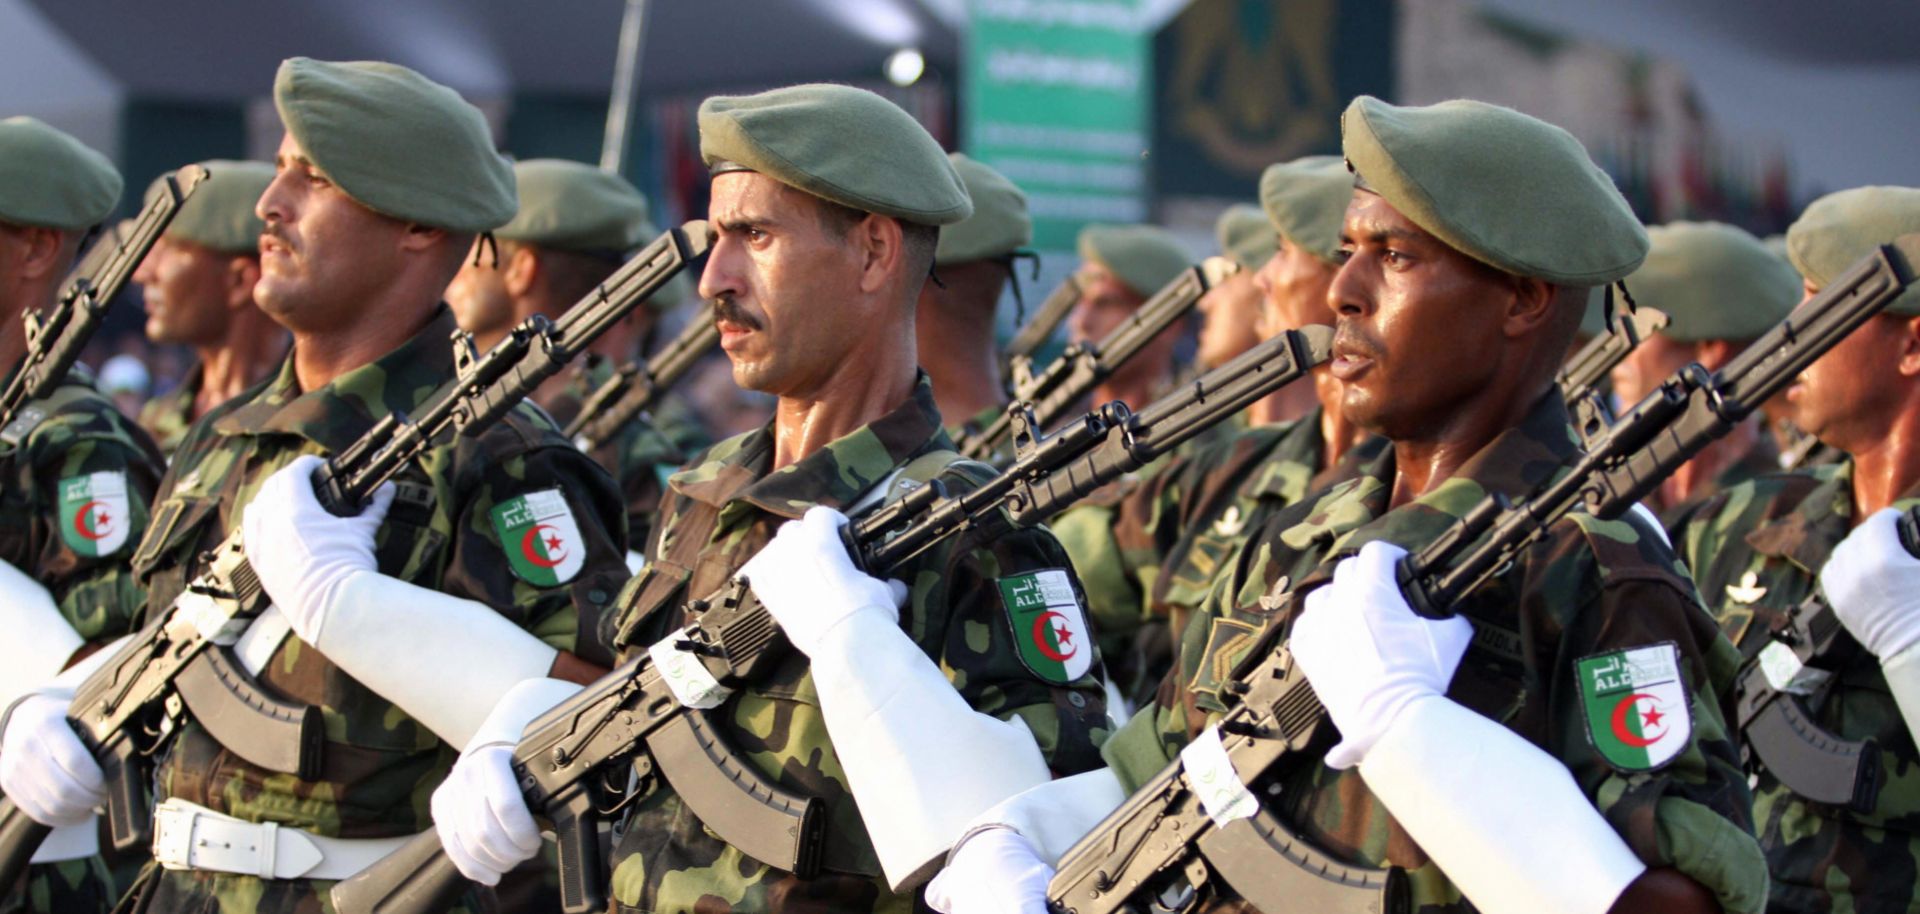 Algerian troops march during a military parade in Tripoli on September 1, 2009 to mark the 40th anniversary since Kadhafi seized power in the north African desert state. 